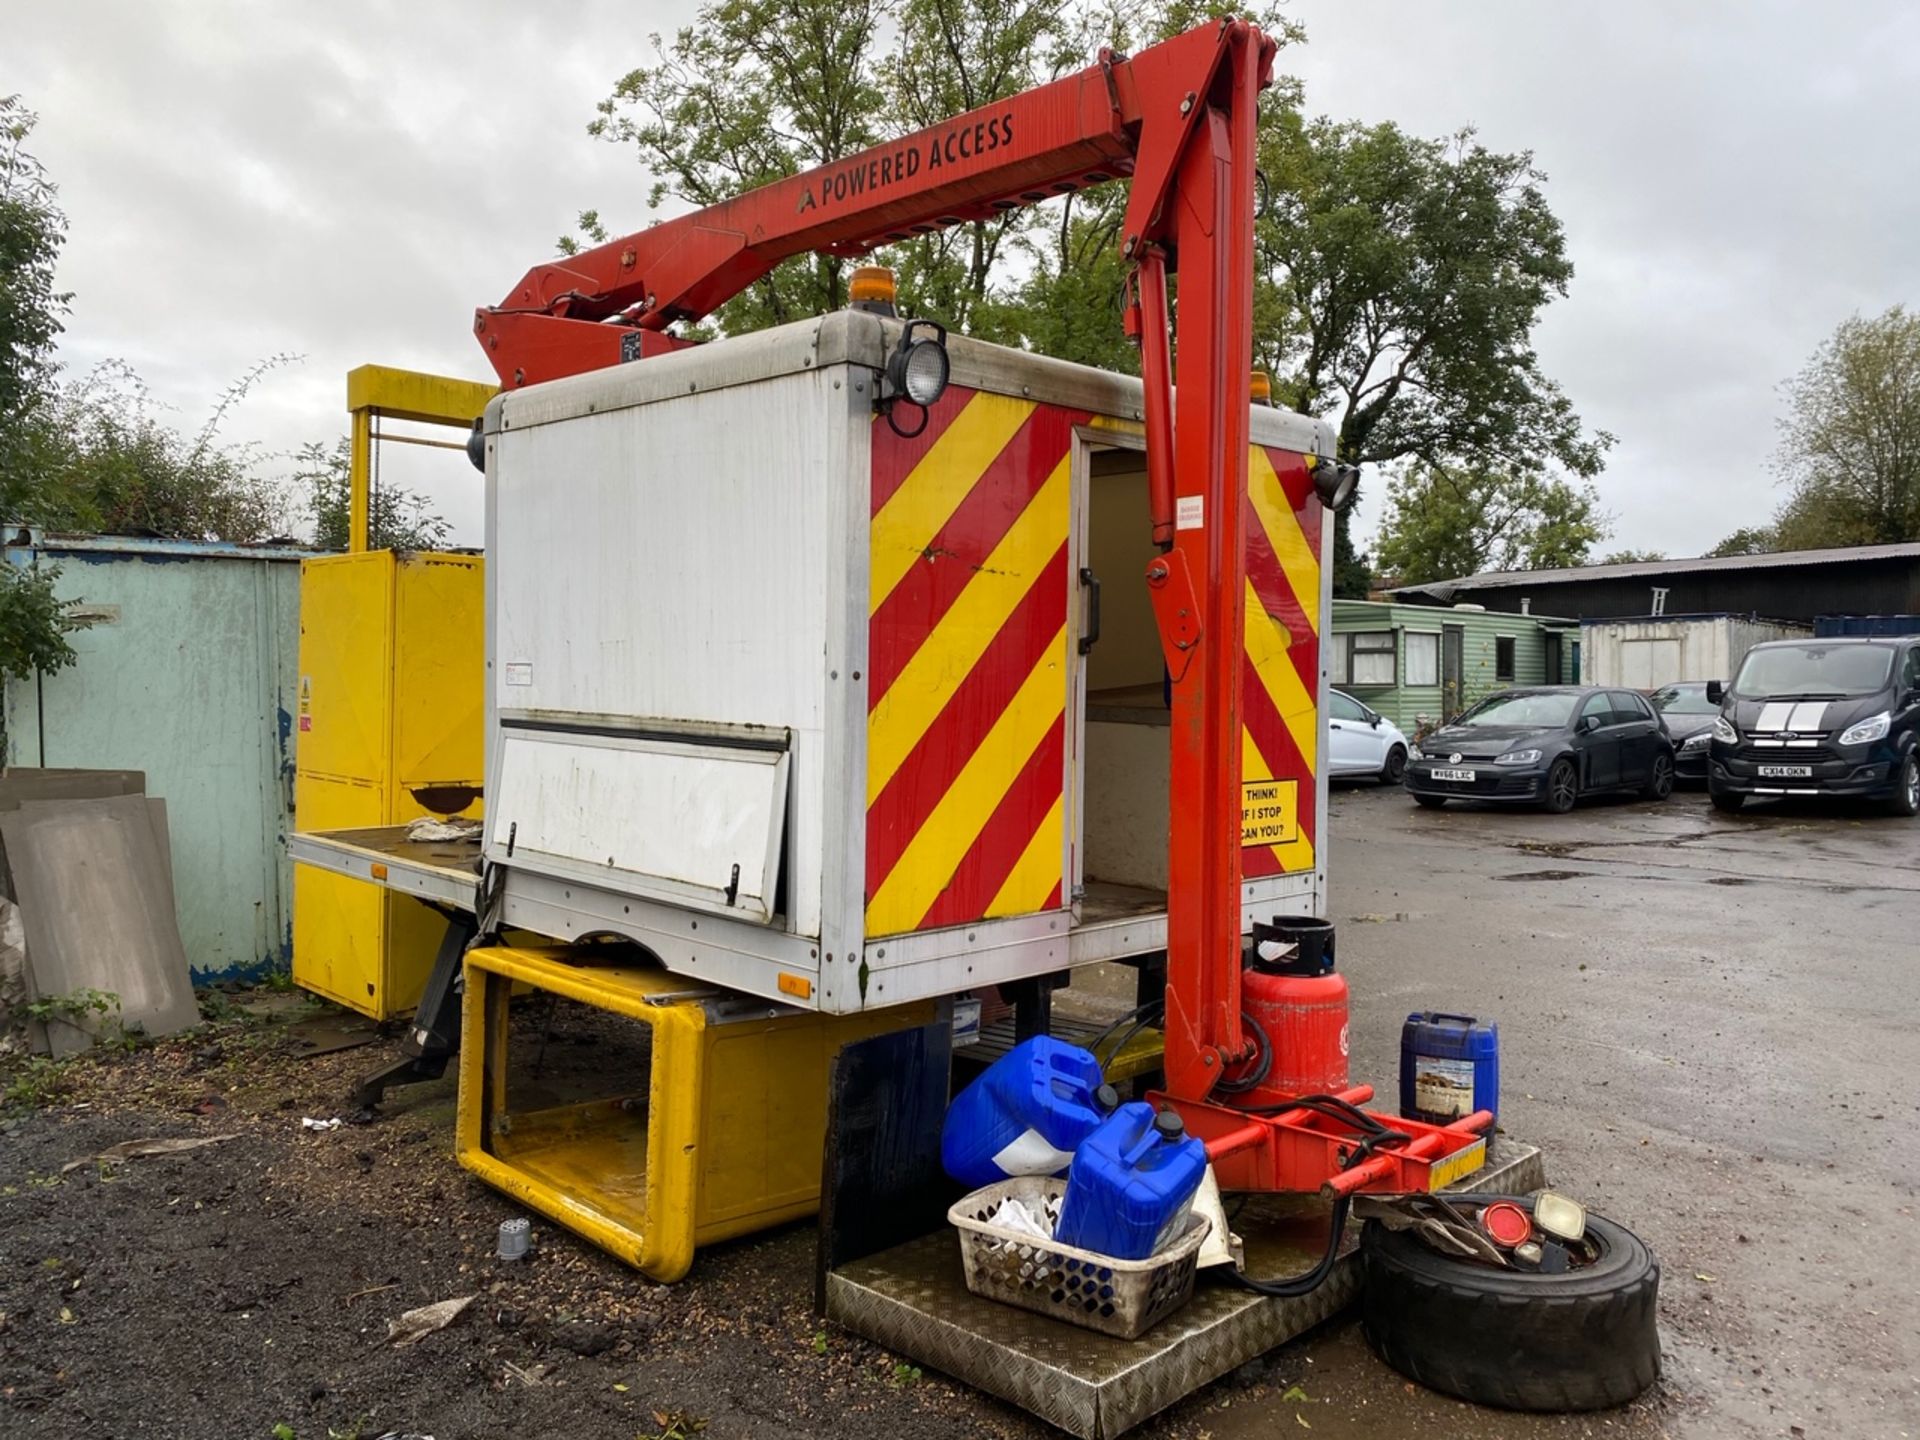 2009 Powered Access 14.5 meter cherry picker, will suit 7.5 ton truck. Runs off 24v electric - Image 3 of 4